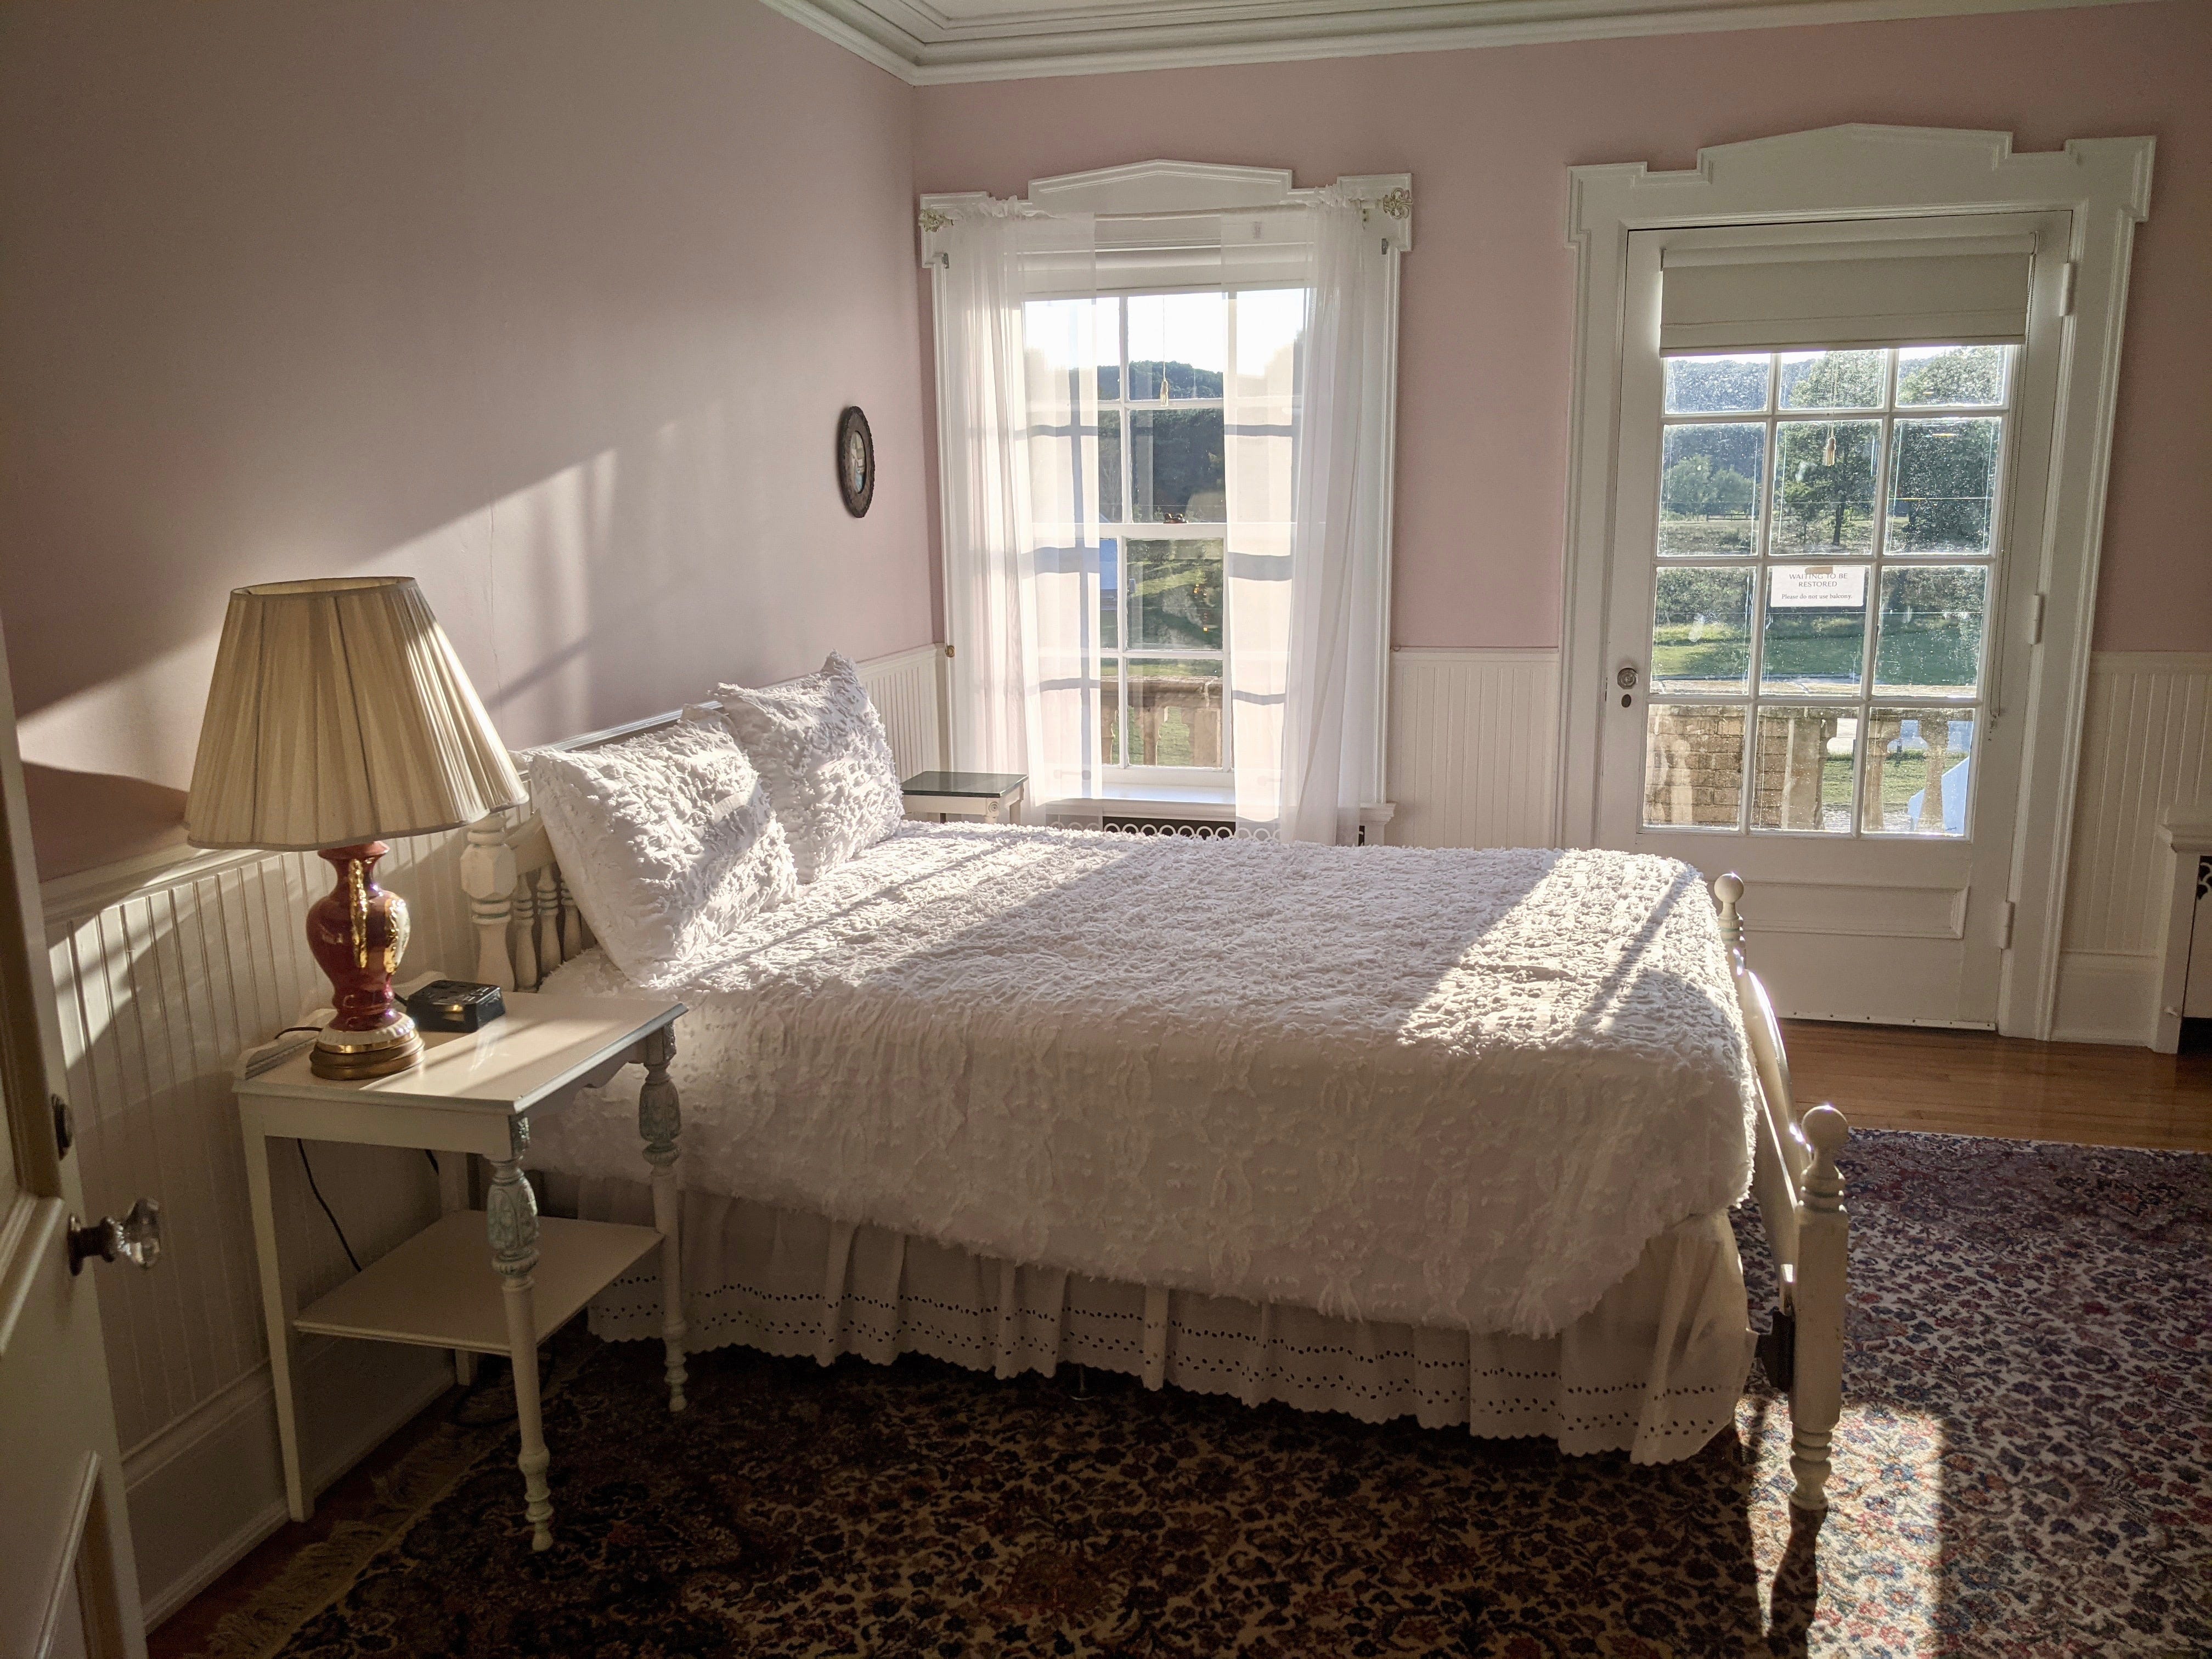 The second floor of Felt Mansion features six bedrooms, including a master bedroom suite and two maids' bedrooms. There are also five full bathrooms.